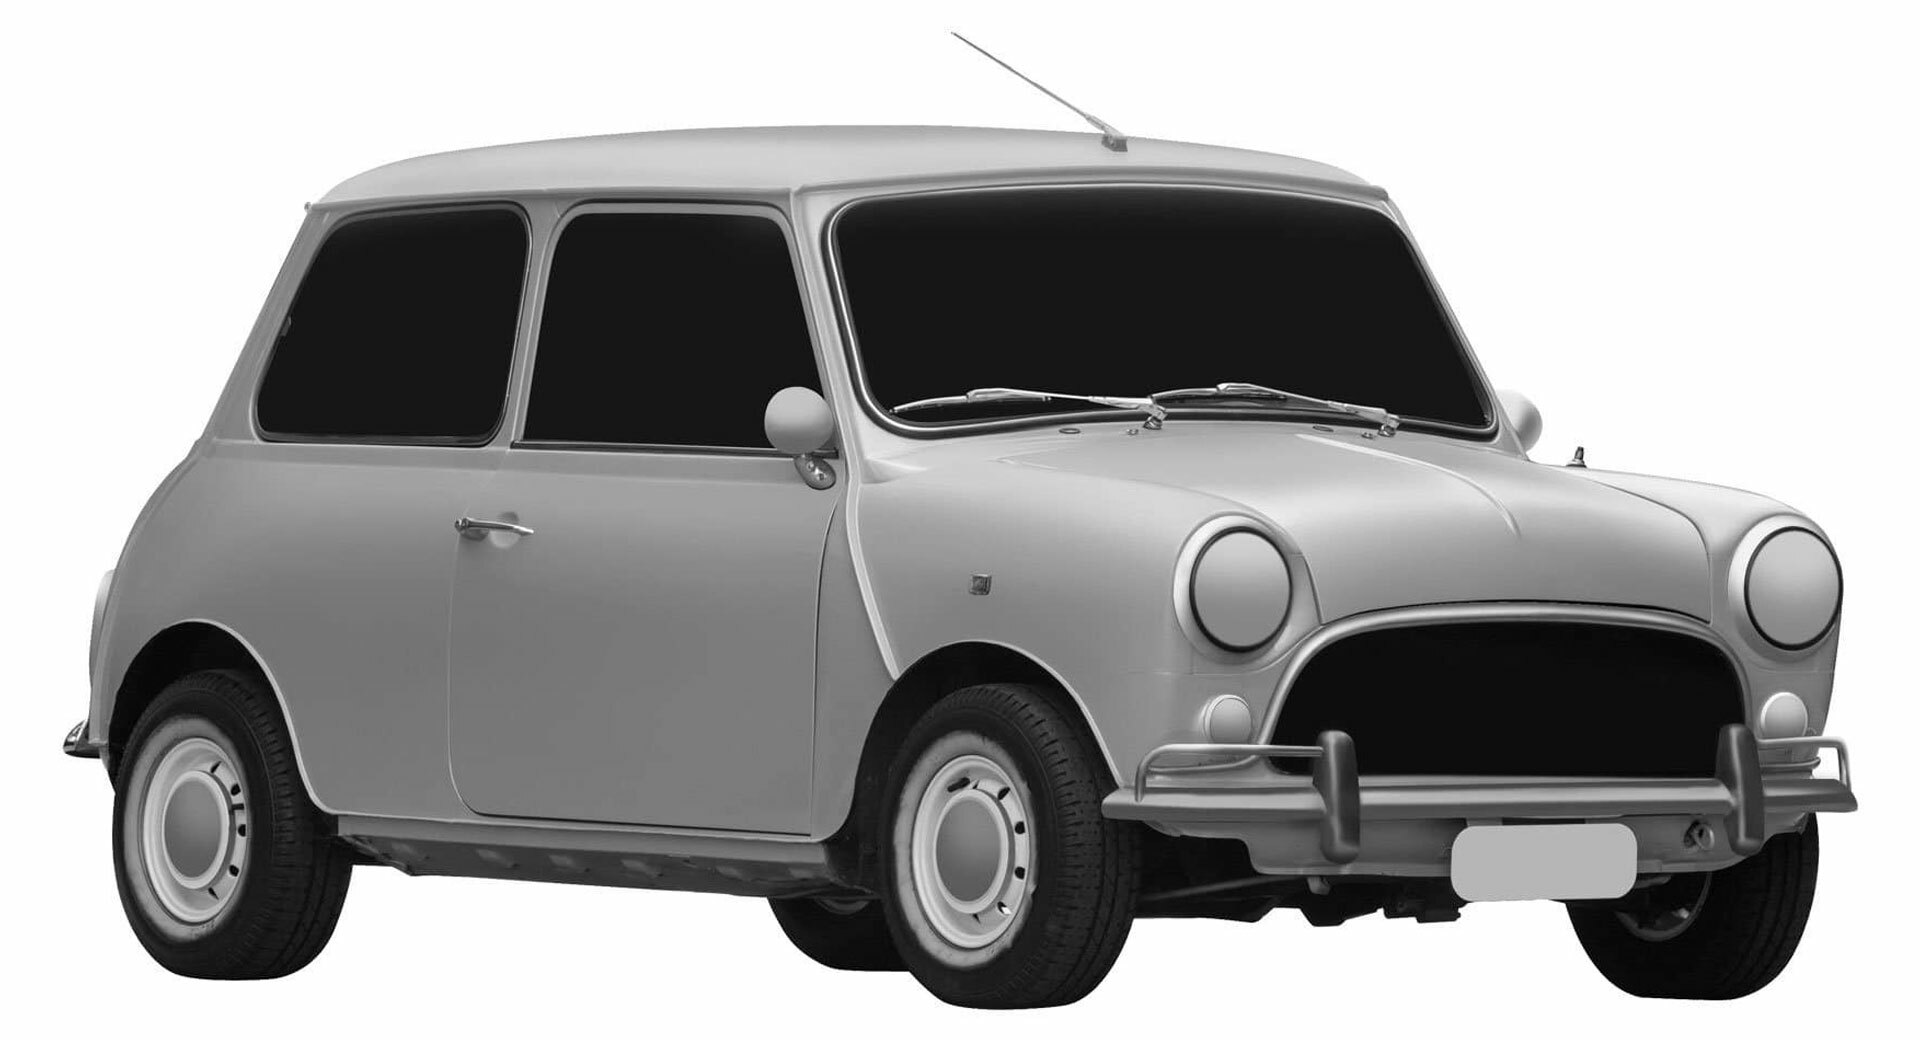 Chinese Company's Attempt To Copyright Classic MINI Design For EV Fails